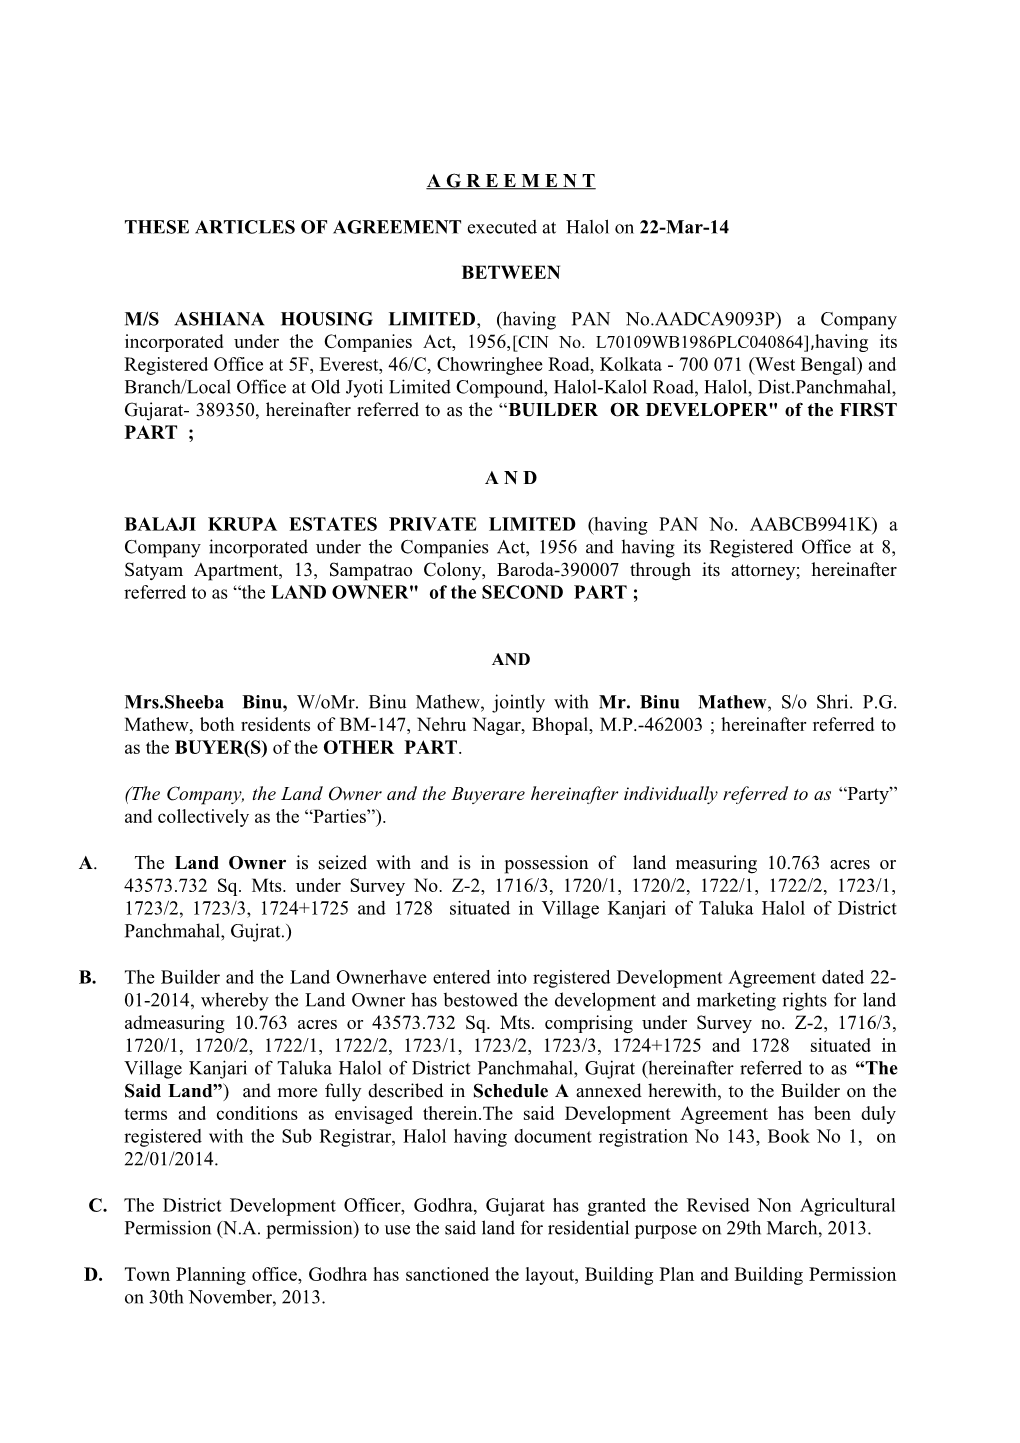 THESE ARTICLES of AGREEMENT Executed at Halol on 22-Mar-14